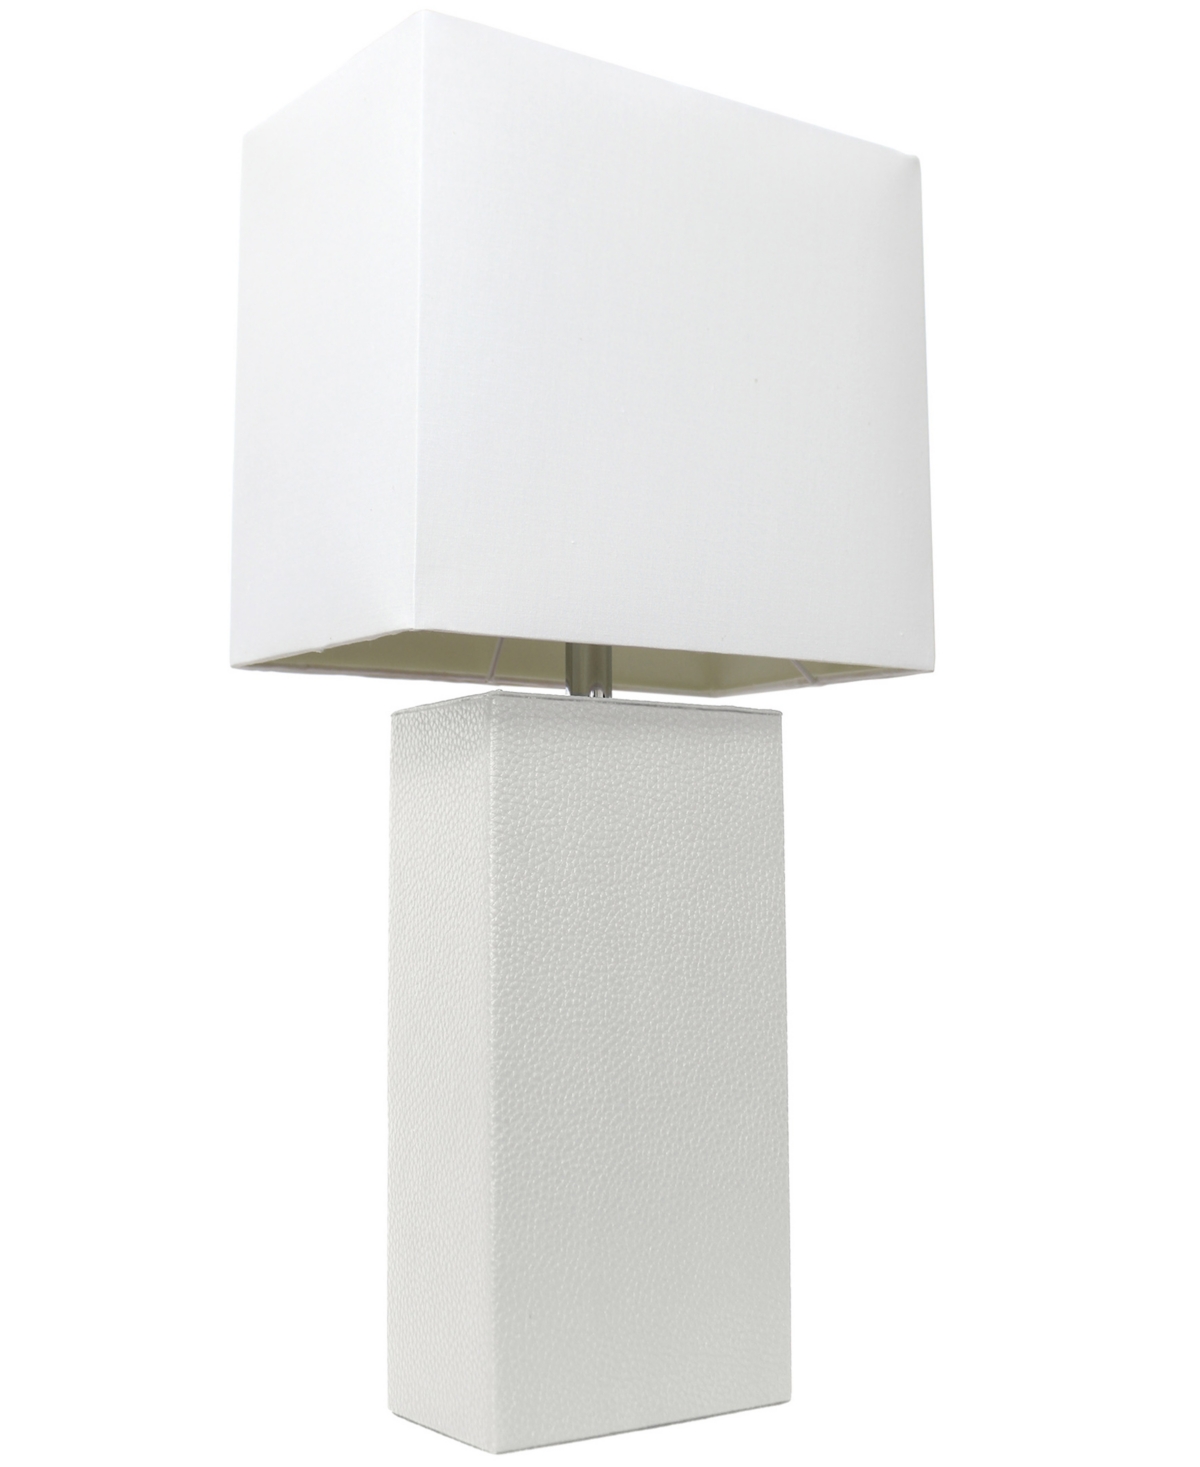 All The Rages Lalia Home Lexington 21" Leather Base Modern Home Decor Bedside Table Lamp With White Rectangular Fa